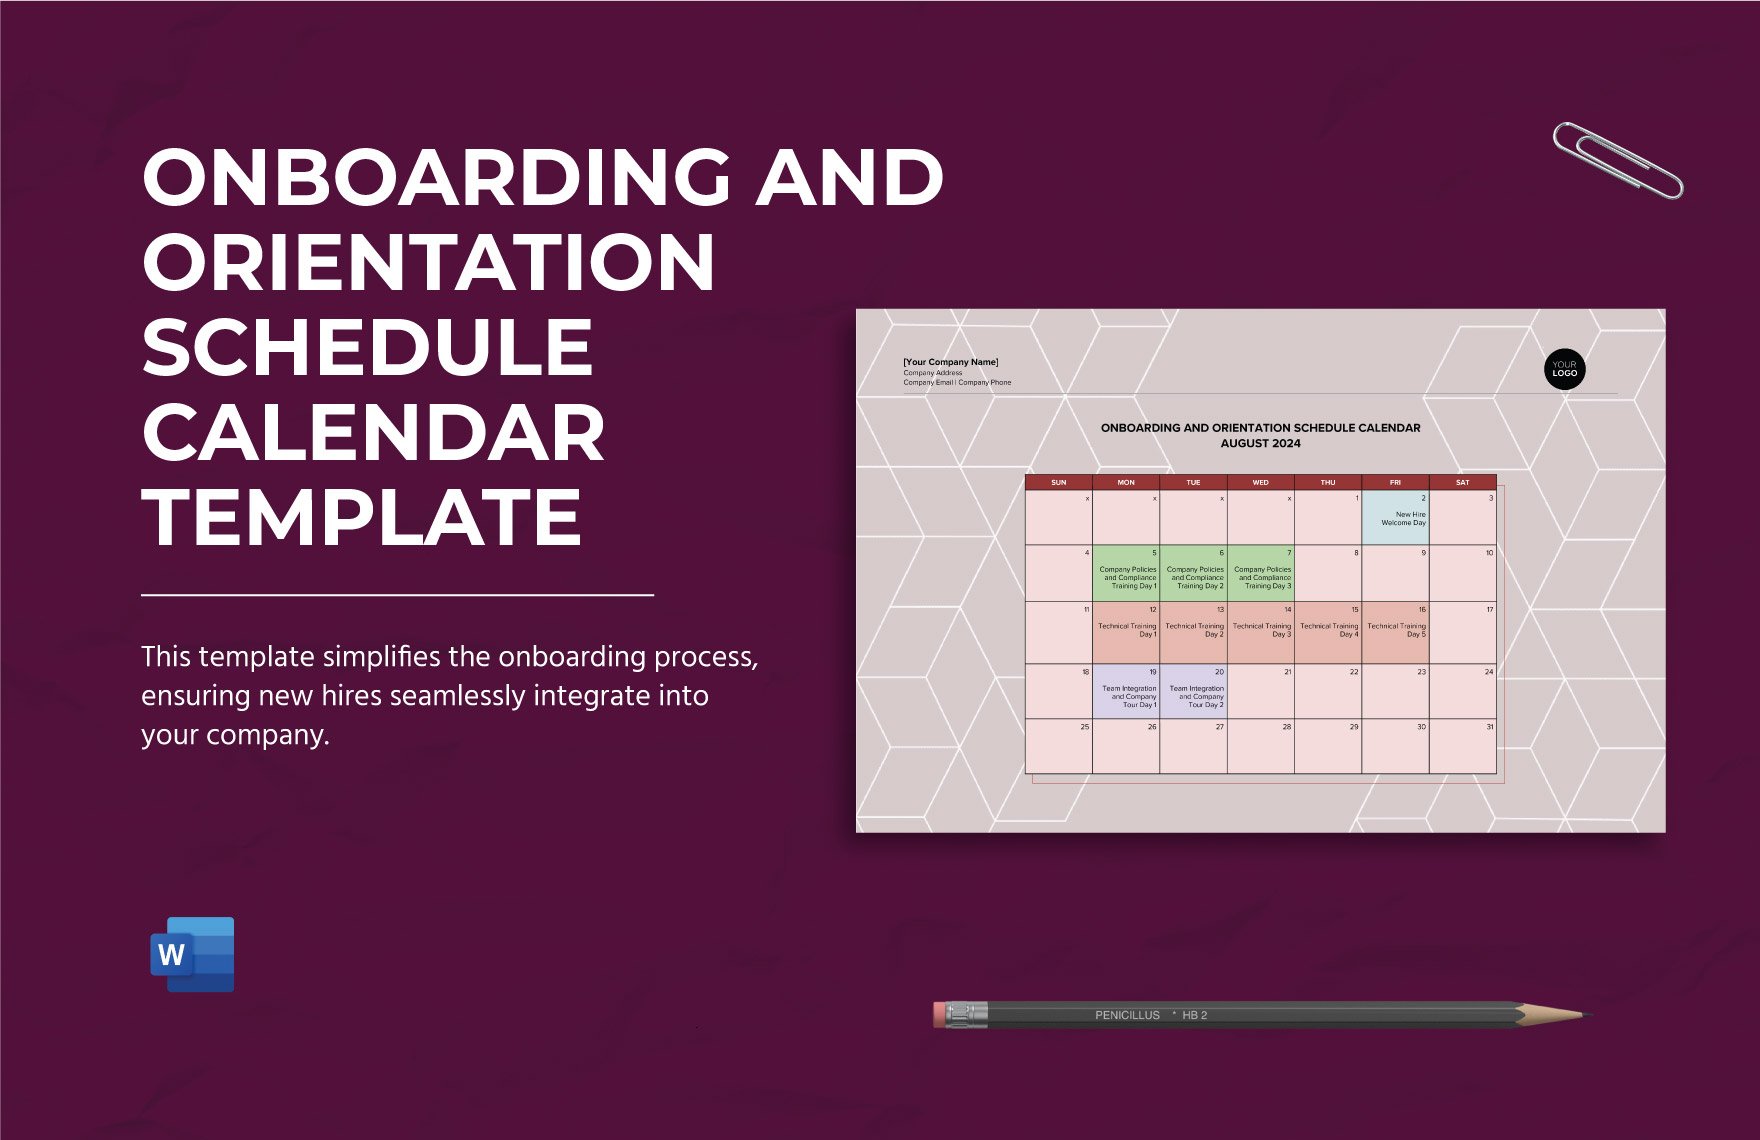 Onboarding and Orientation Schedule Calendar Template in Word